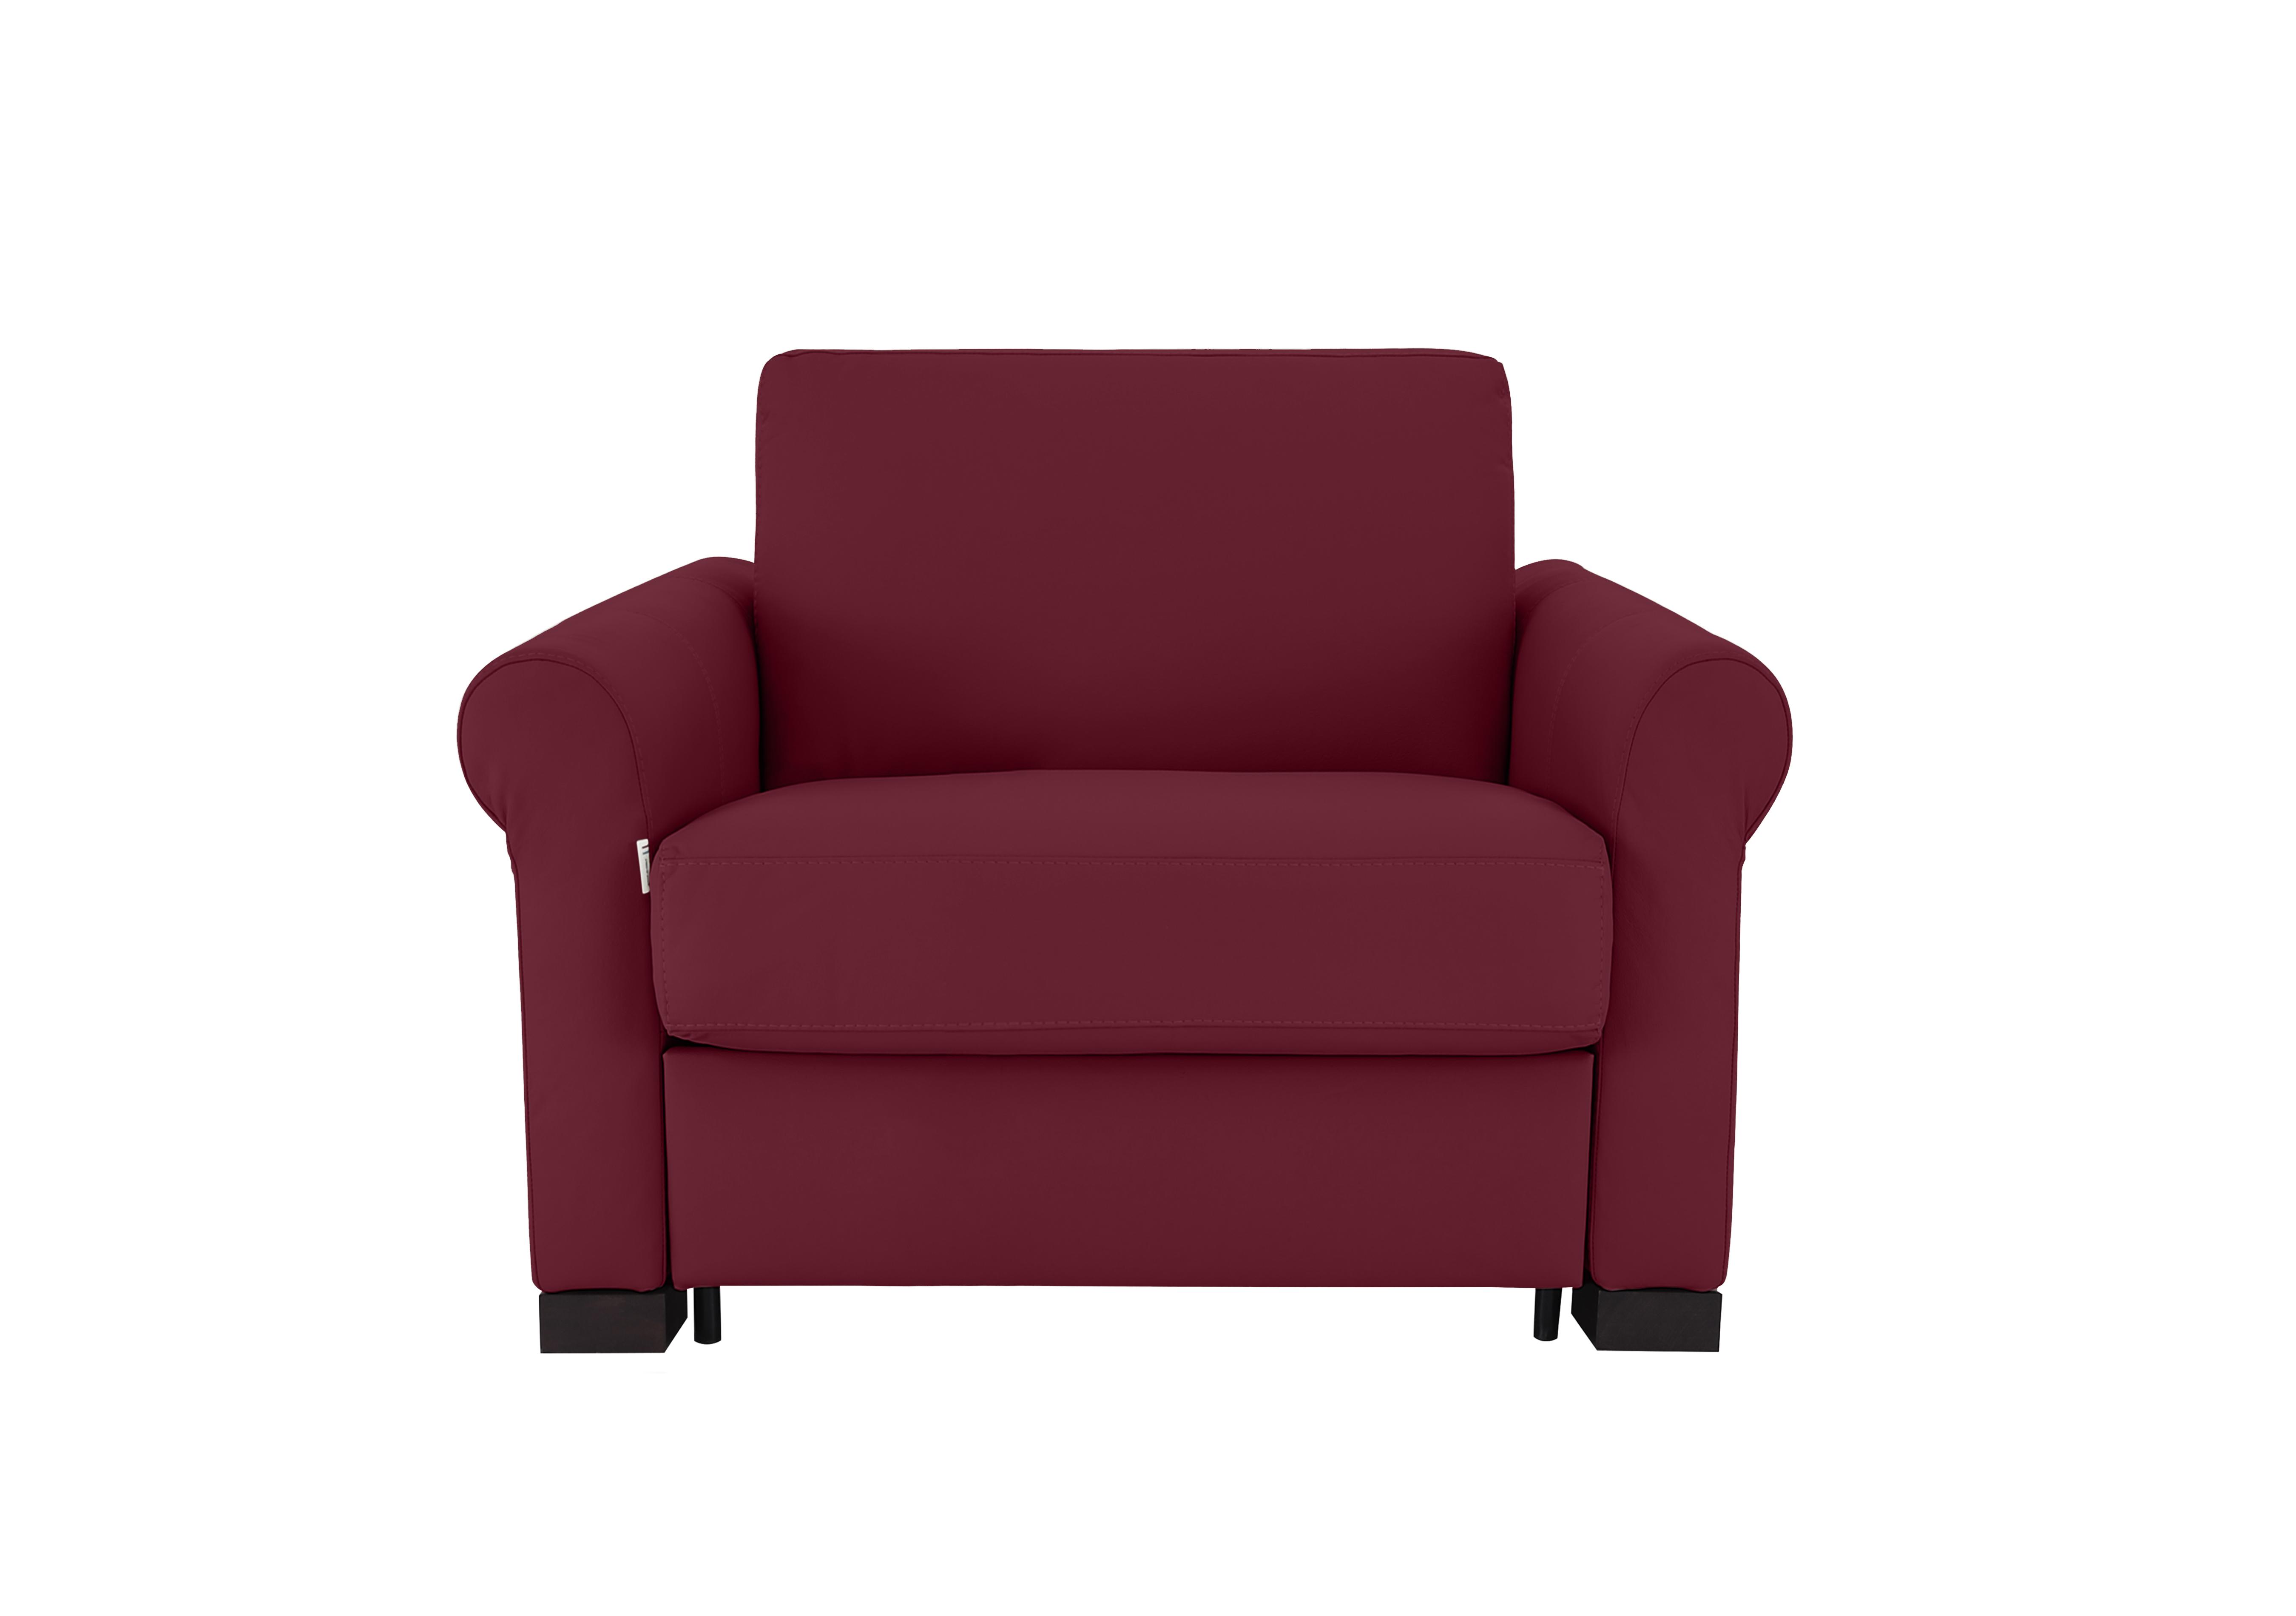 Alcova Leather Chair Sofa Bed with Scroll Arms in Dali Bordeaux 1521 on Furniture Village